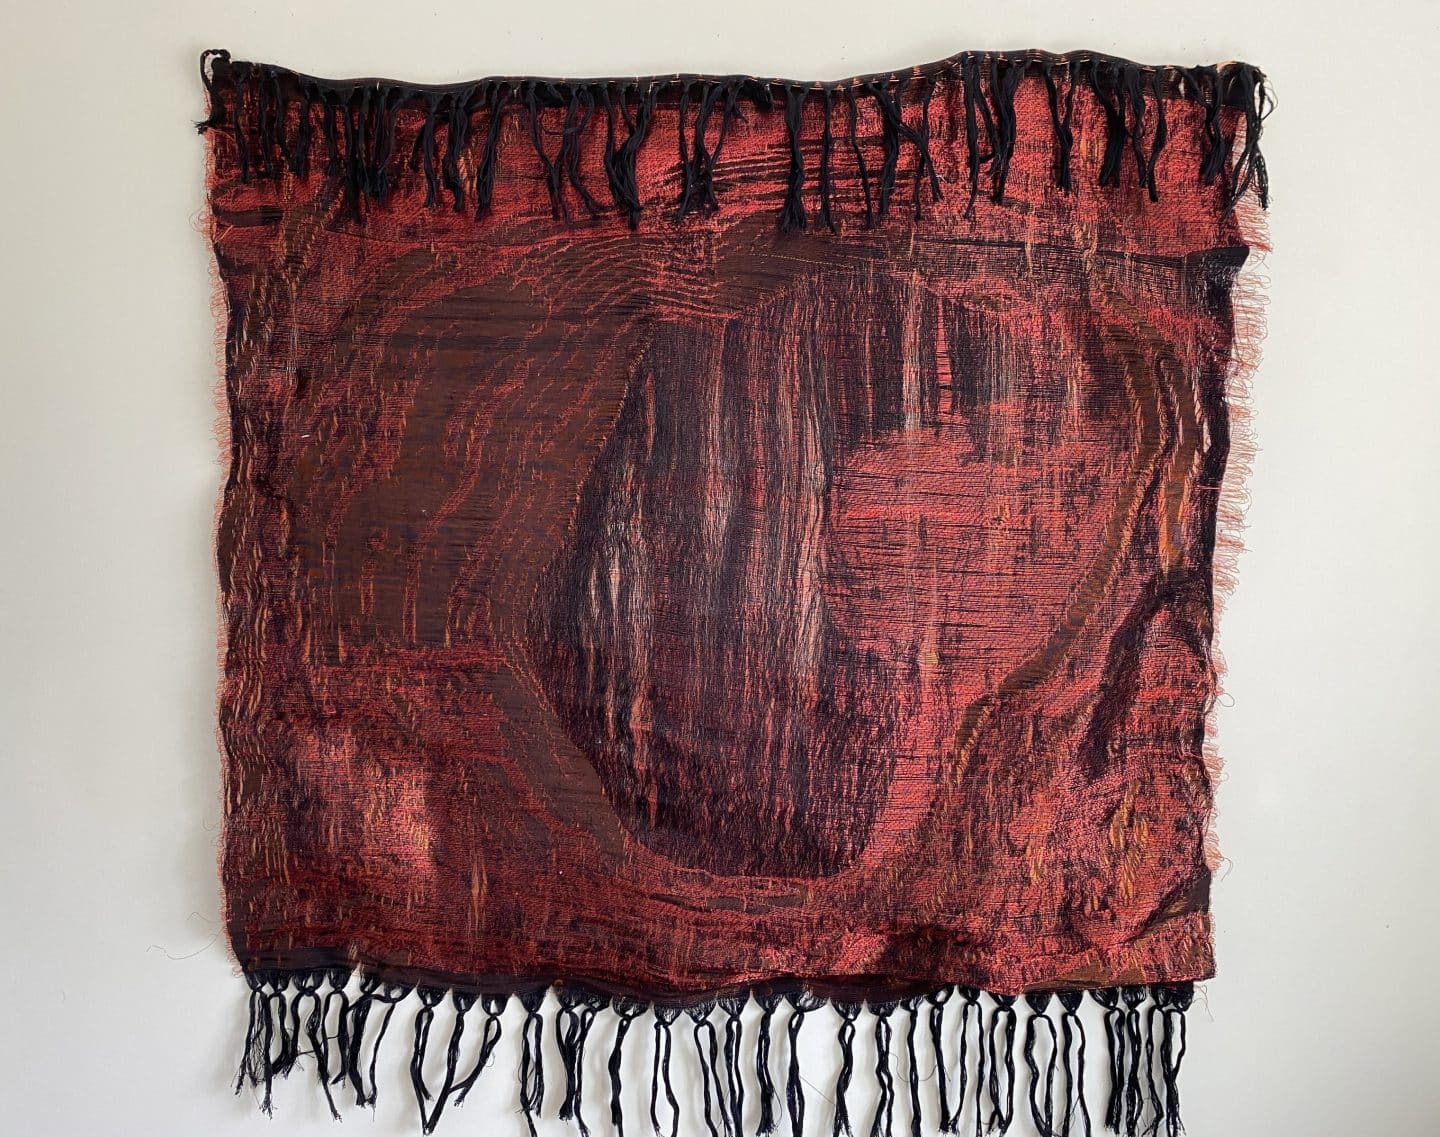 Soledad Muñoz, Carmen de Andacollo (Wounds of Chile series), 2021, double woven copper and red thread. Collection of the artist.